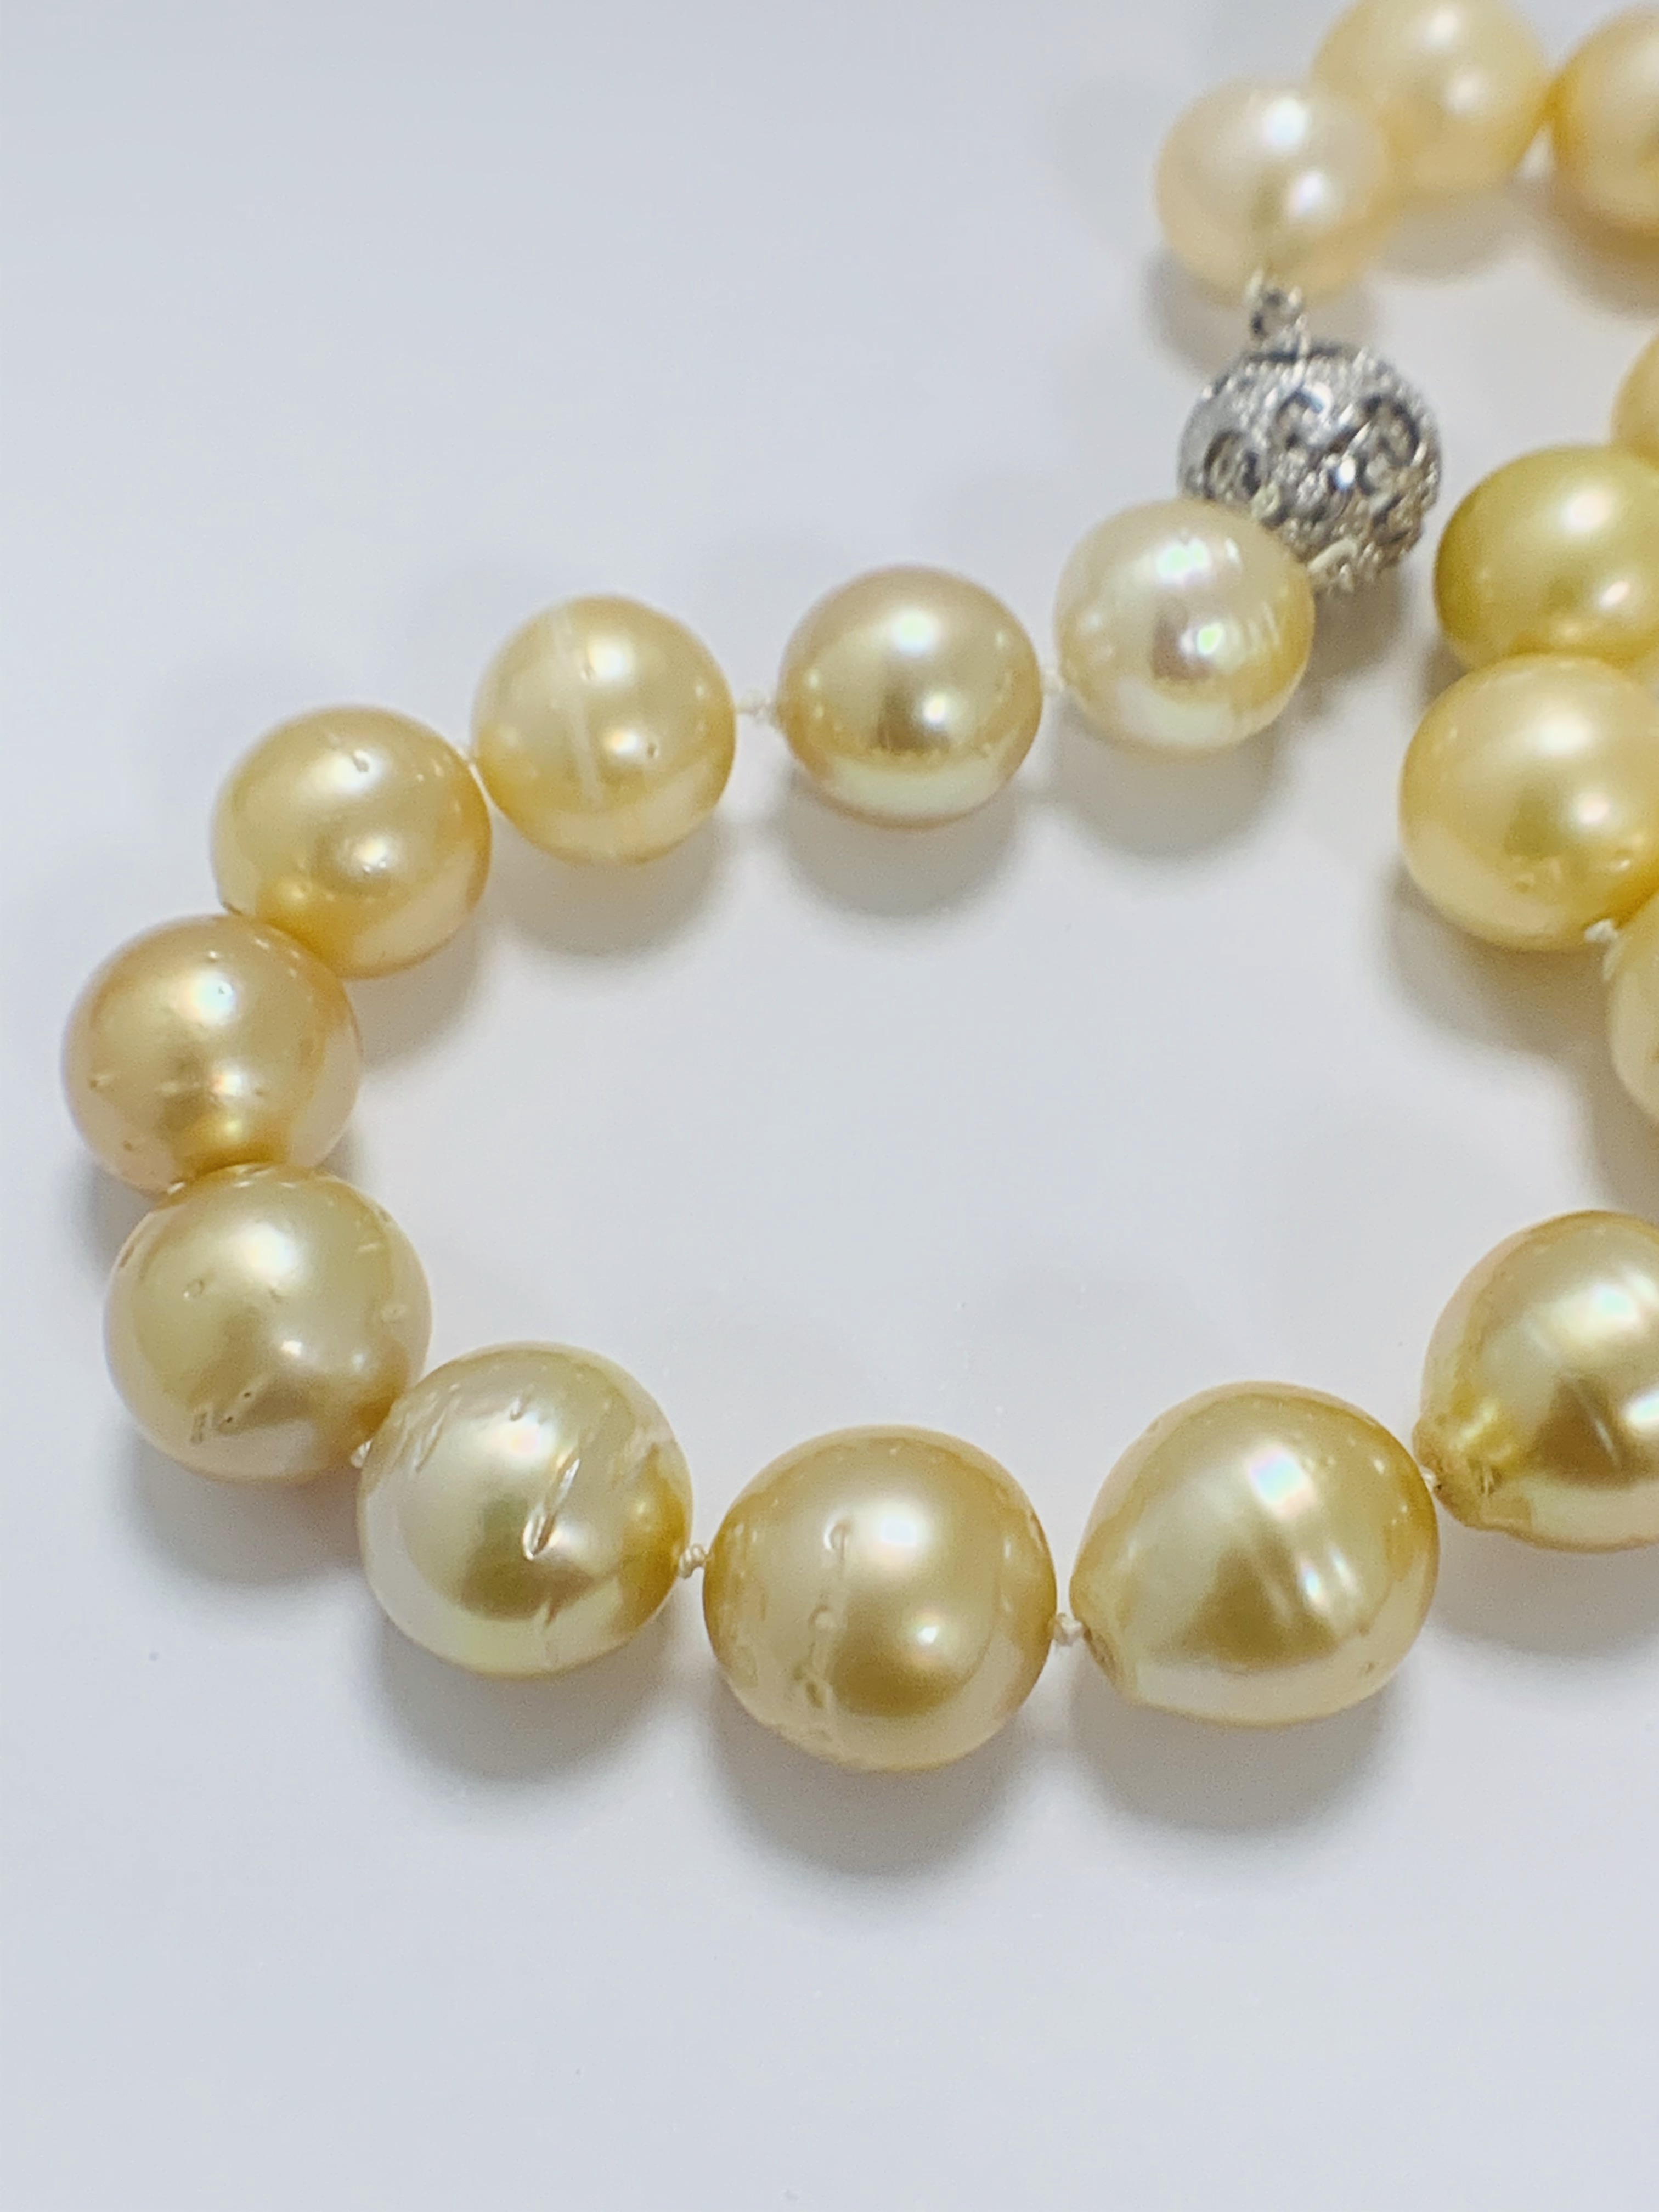 Pearl and Diamond necklace strand featuring, 33 South Sea Pearls, with 4 round brilliant cut Diamond - Image 3 of 13